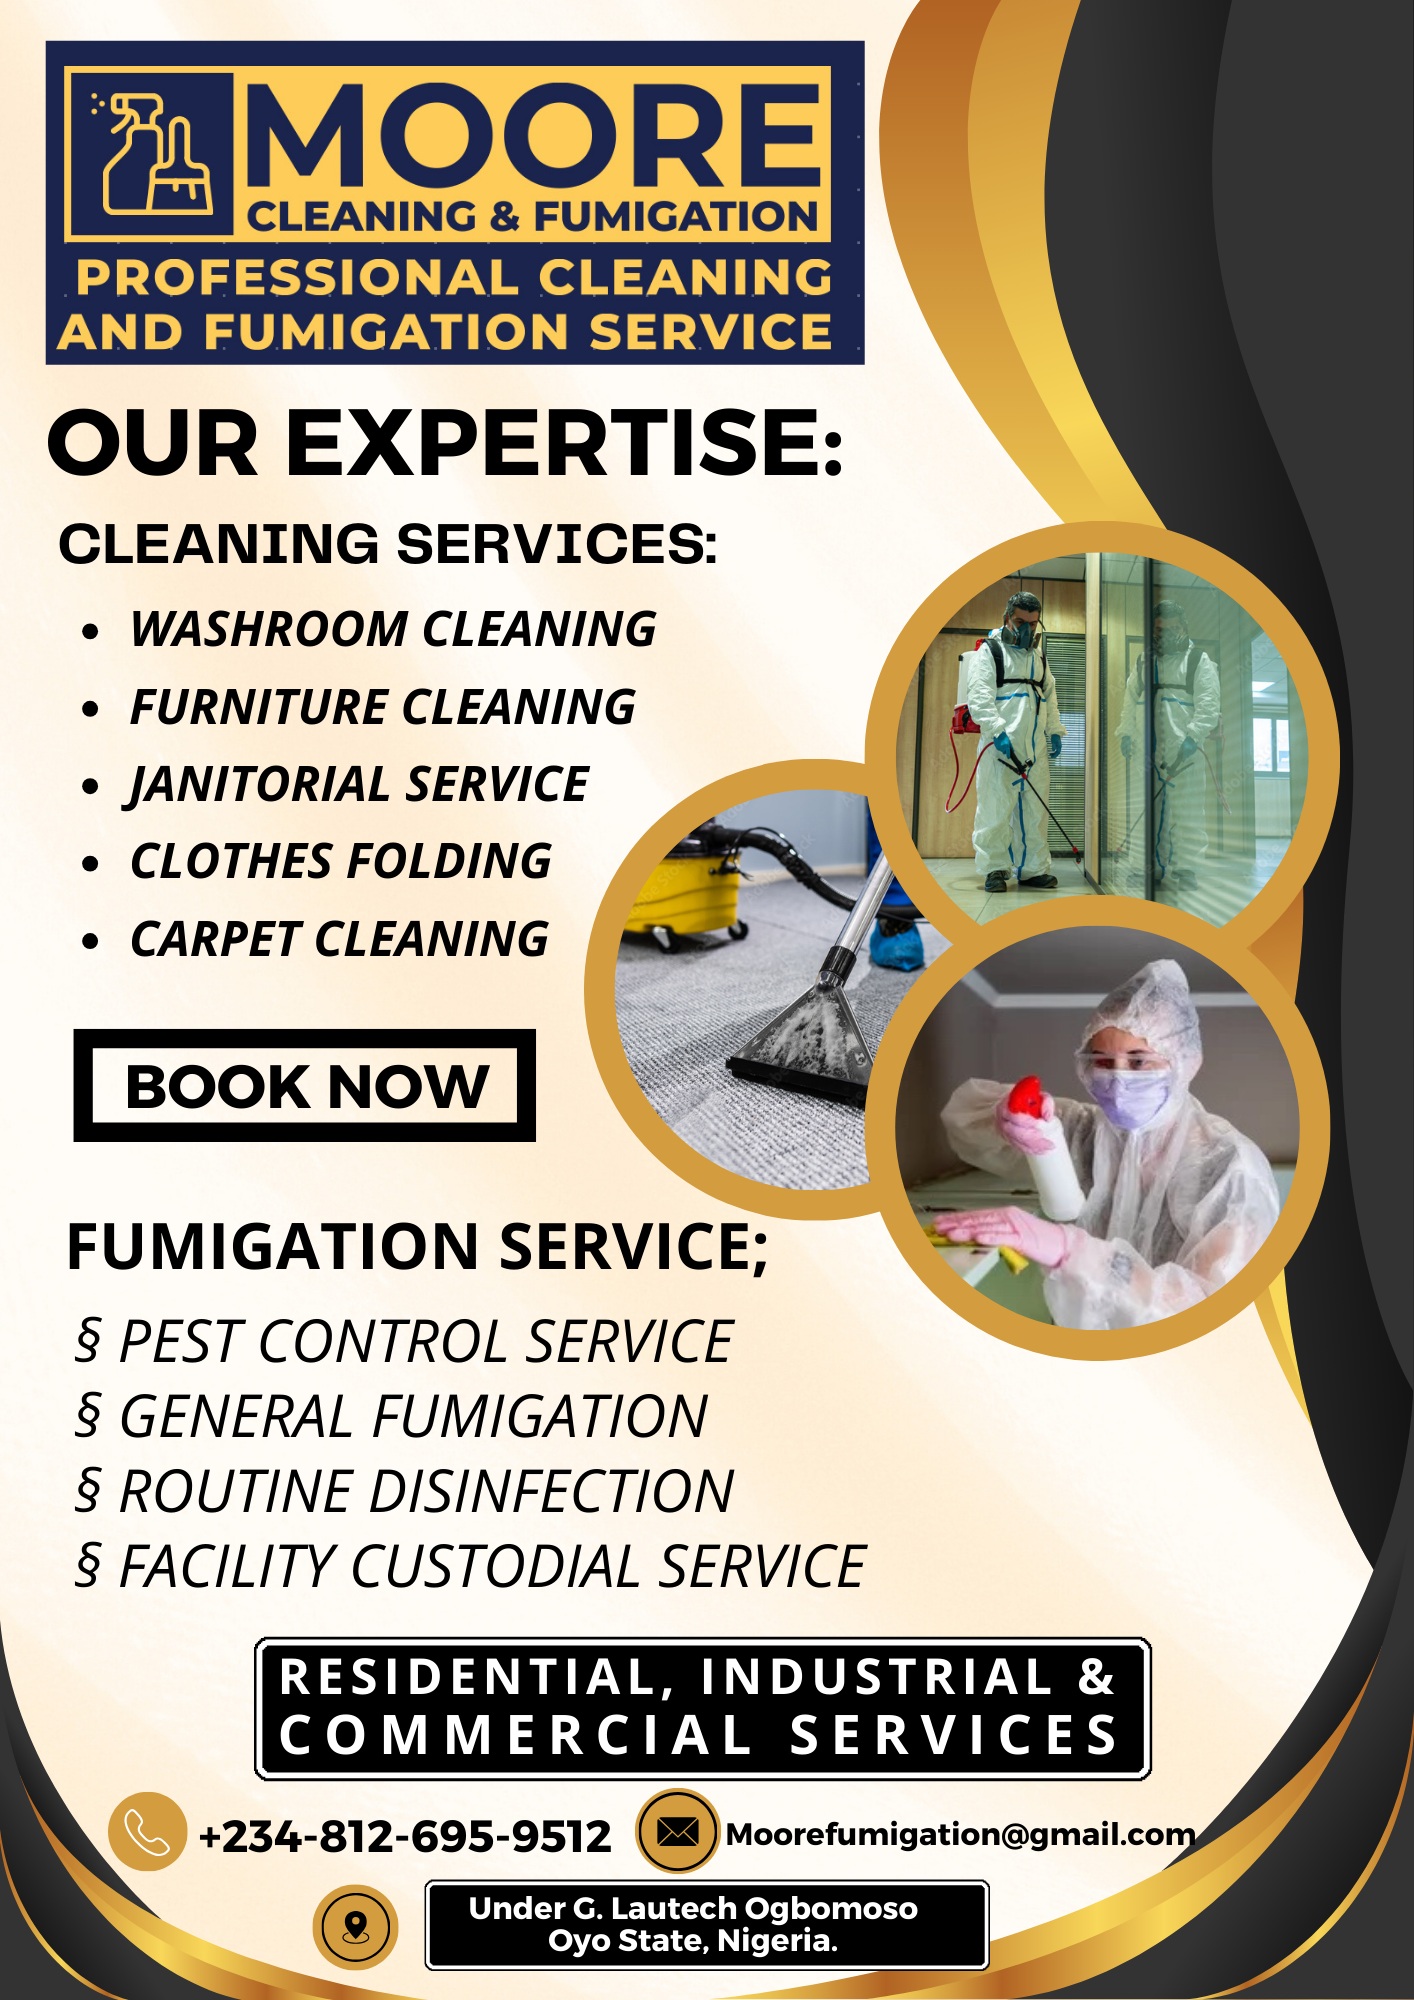 MOORE CLEANING & FUMIGATION provider